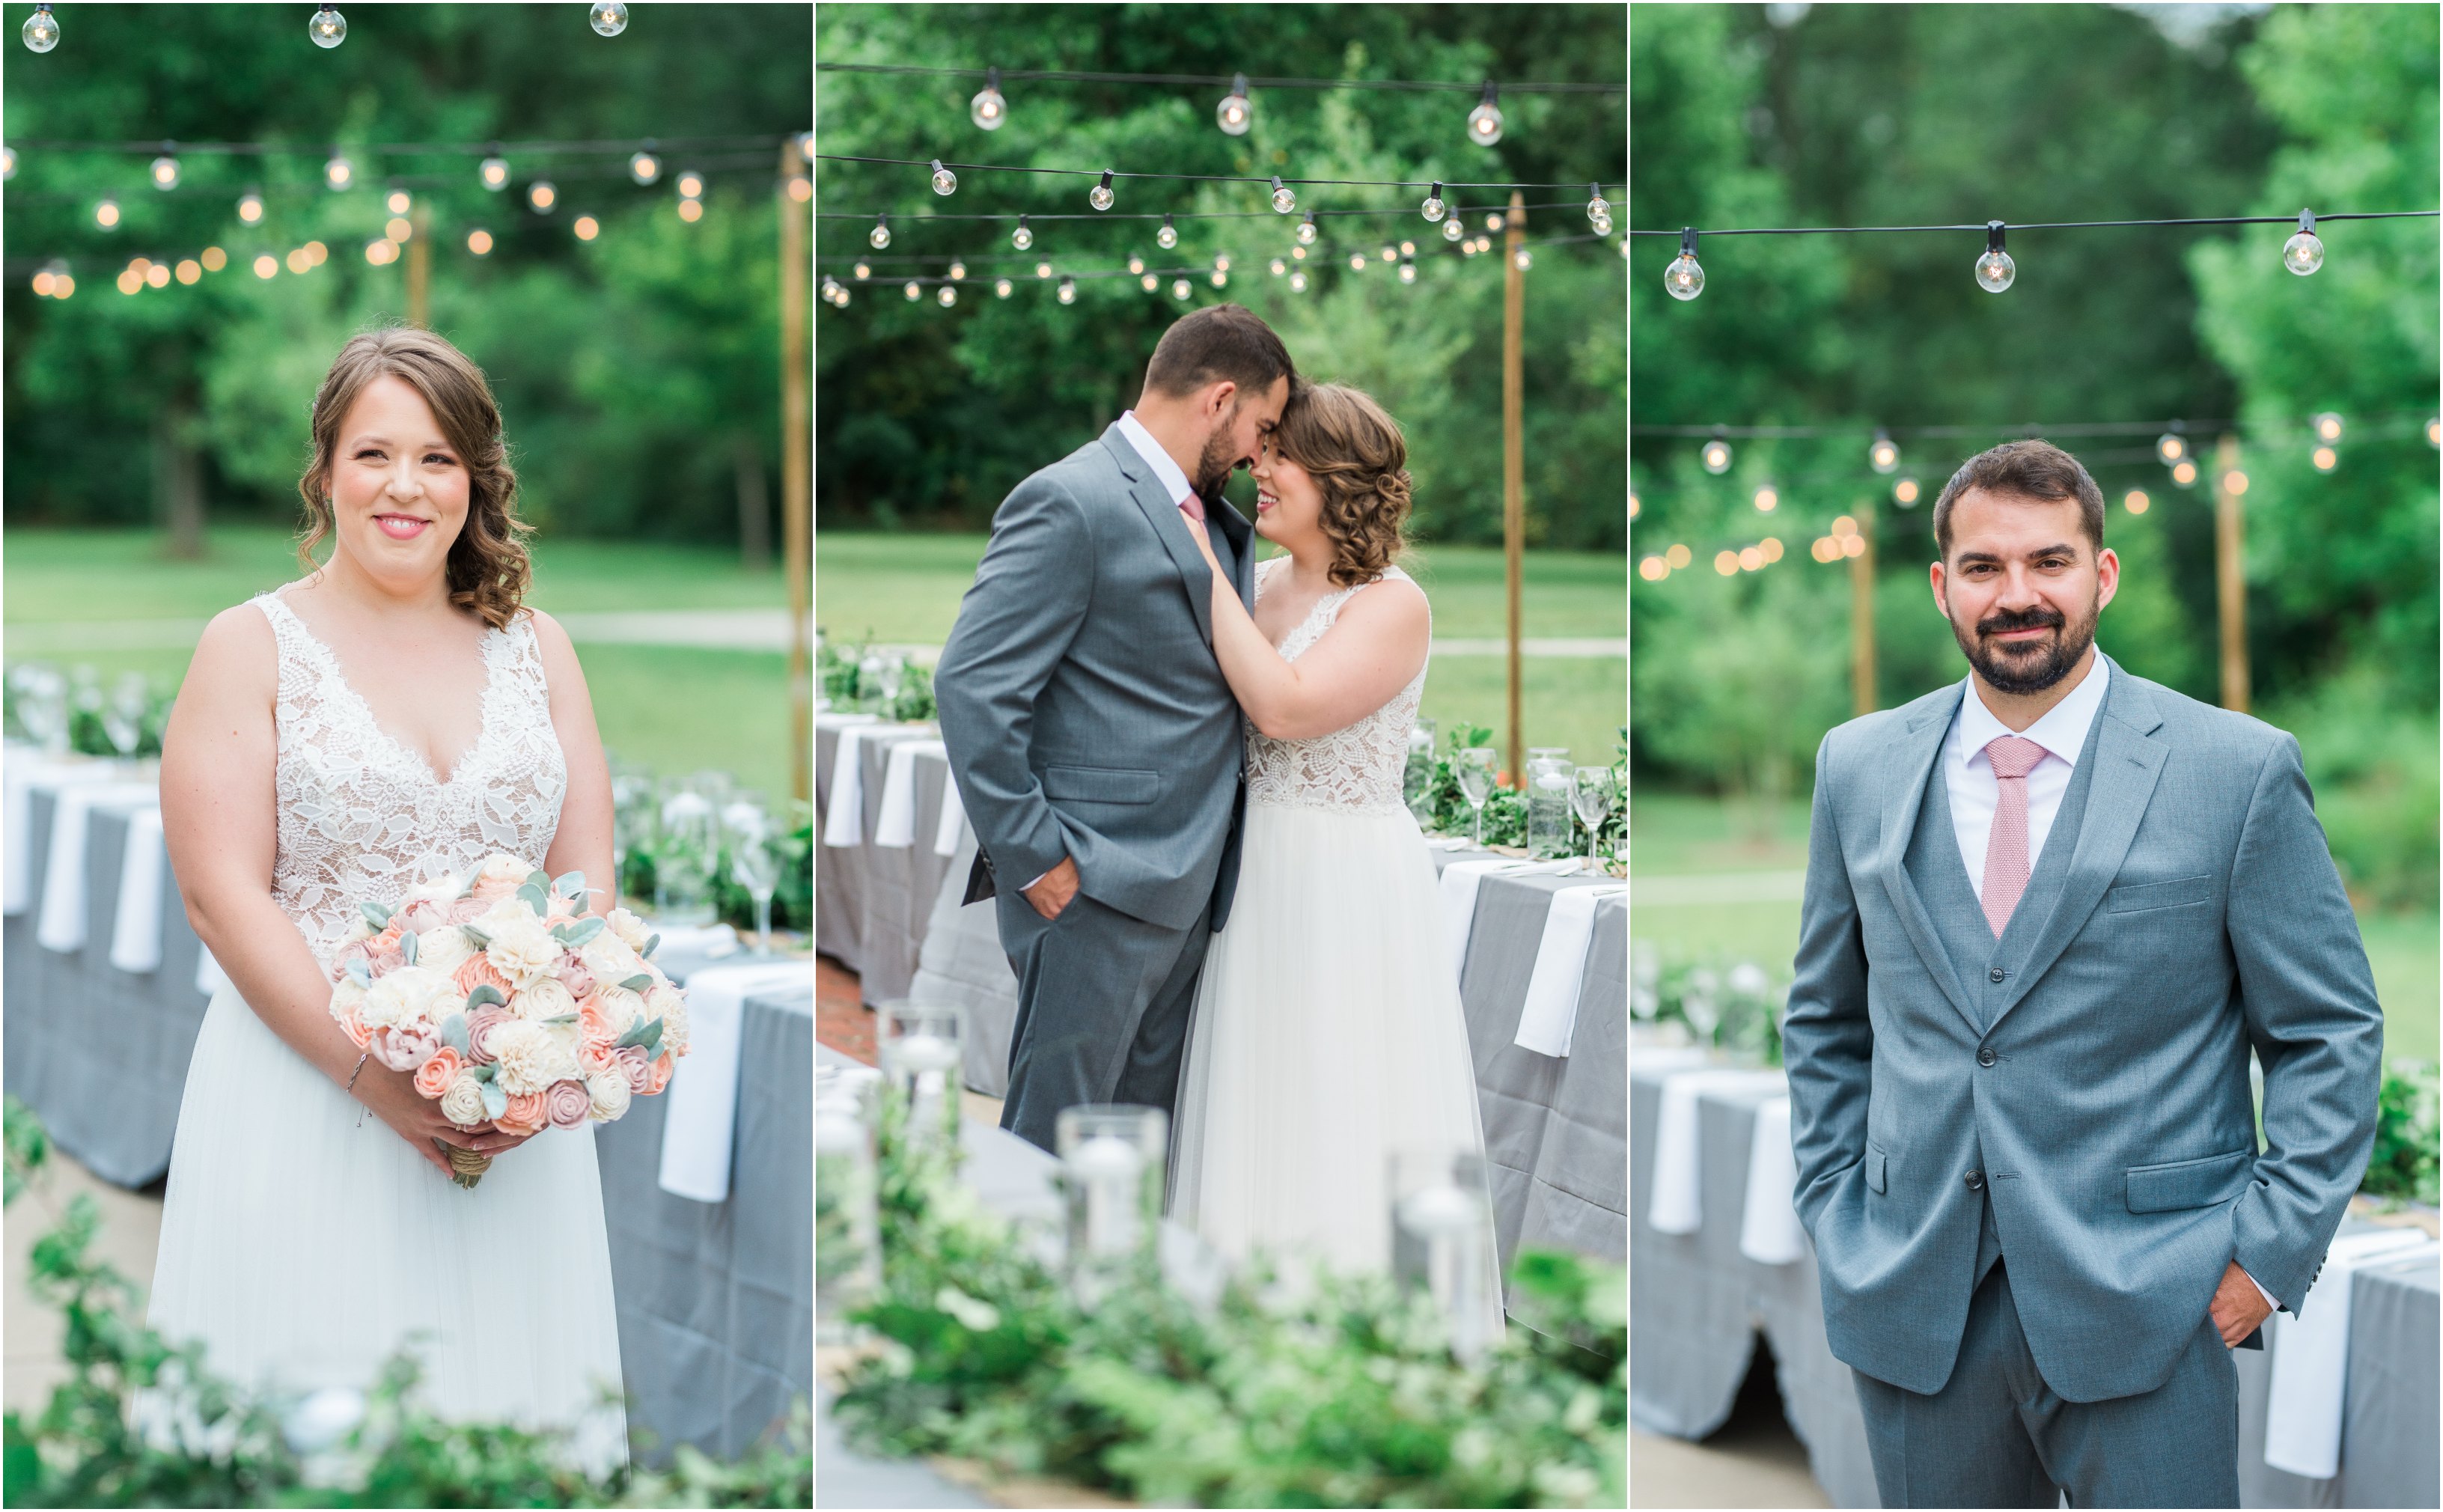 wedding day outdoors, wedding at sharon mills county park, outdoor wedding day, couple photography, do it yourself wedding day, intimate wedding day inspiration, summer wedding day, summer wedding photography, casual wedding day